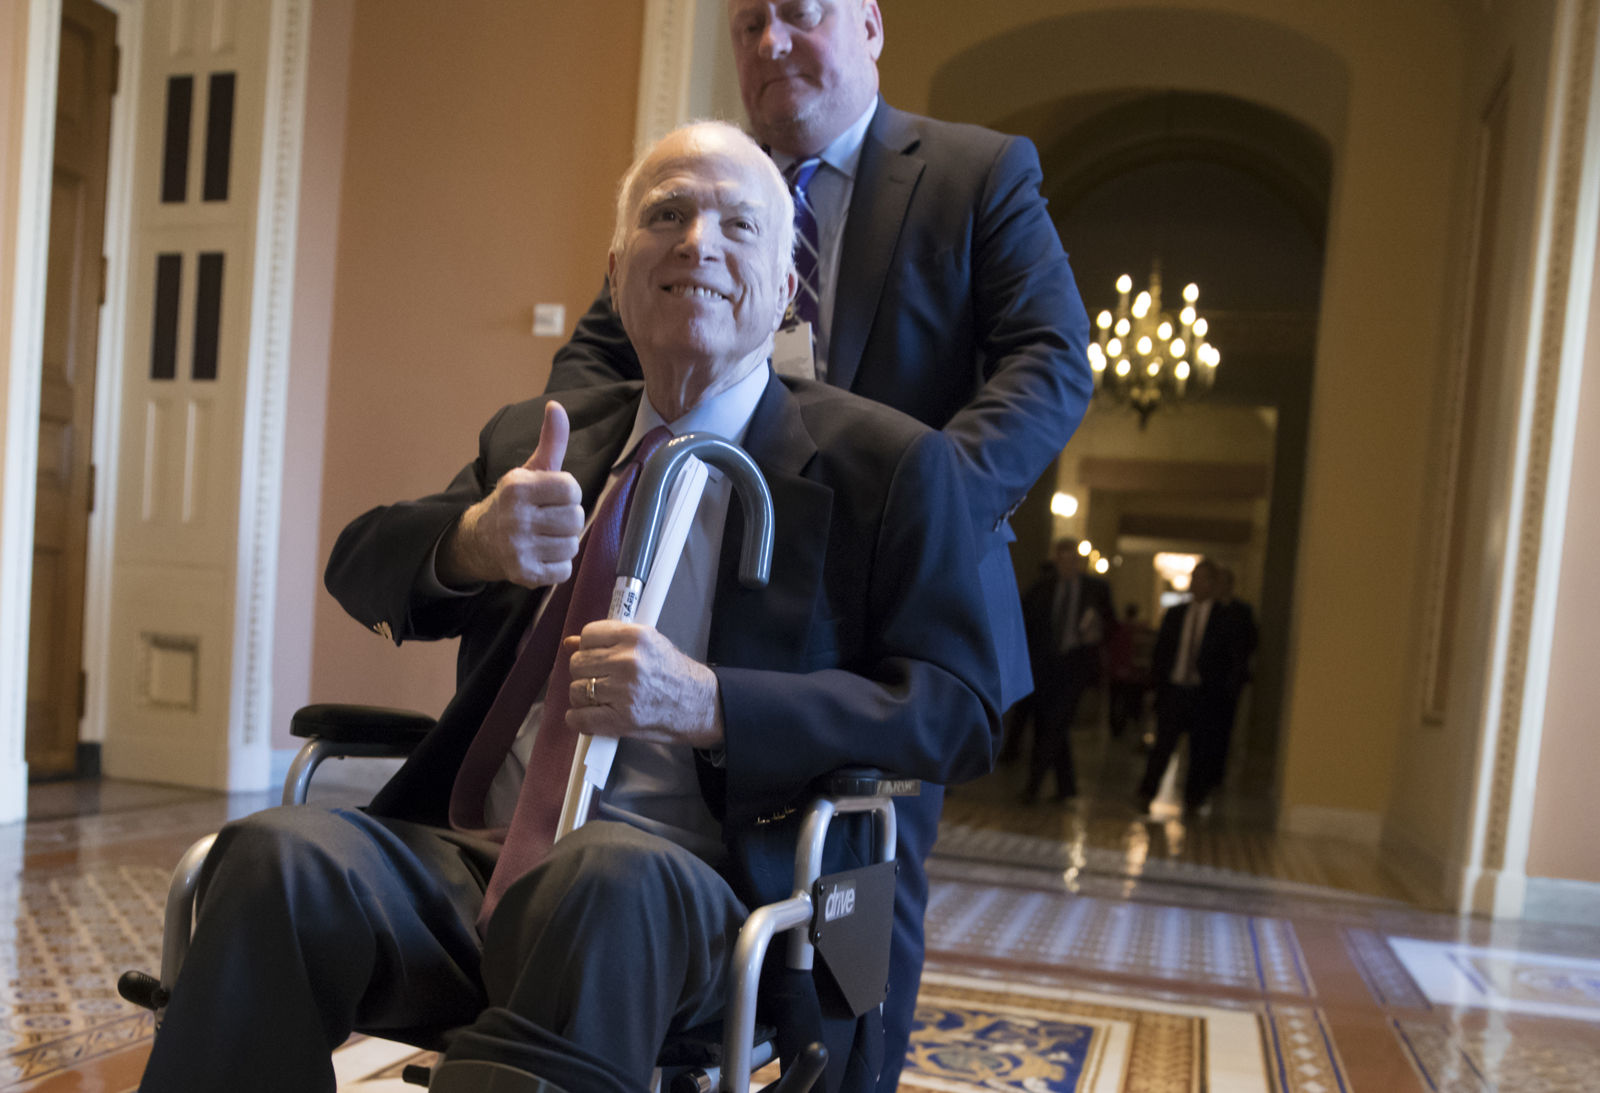 Sen. John McCain leaving a closed-door session with Republican senators on Dec. 1, 2017. McCain was hospitalized for side effects from his brain cancer treatment in December and announced he would miss the Senate vote on the Republican tax bill to spend the holidays at home in Arizona with his family. (AP Photo/J. Scott Applewhite, File)